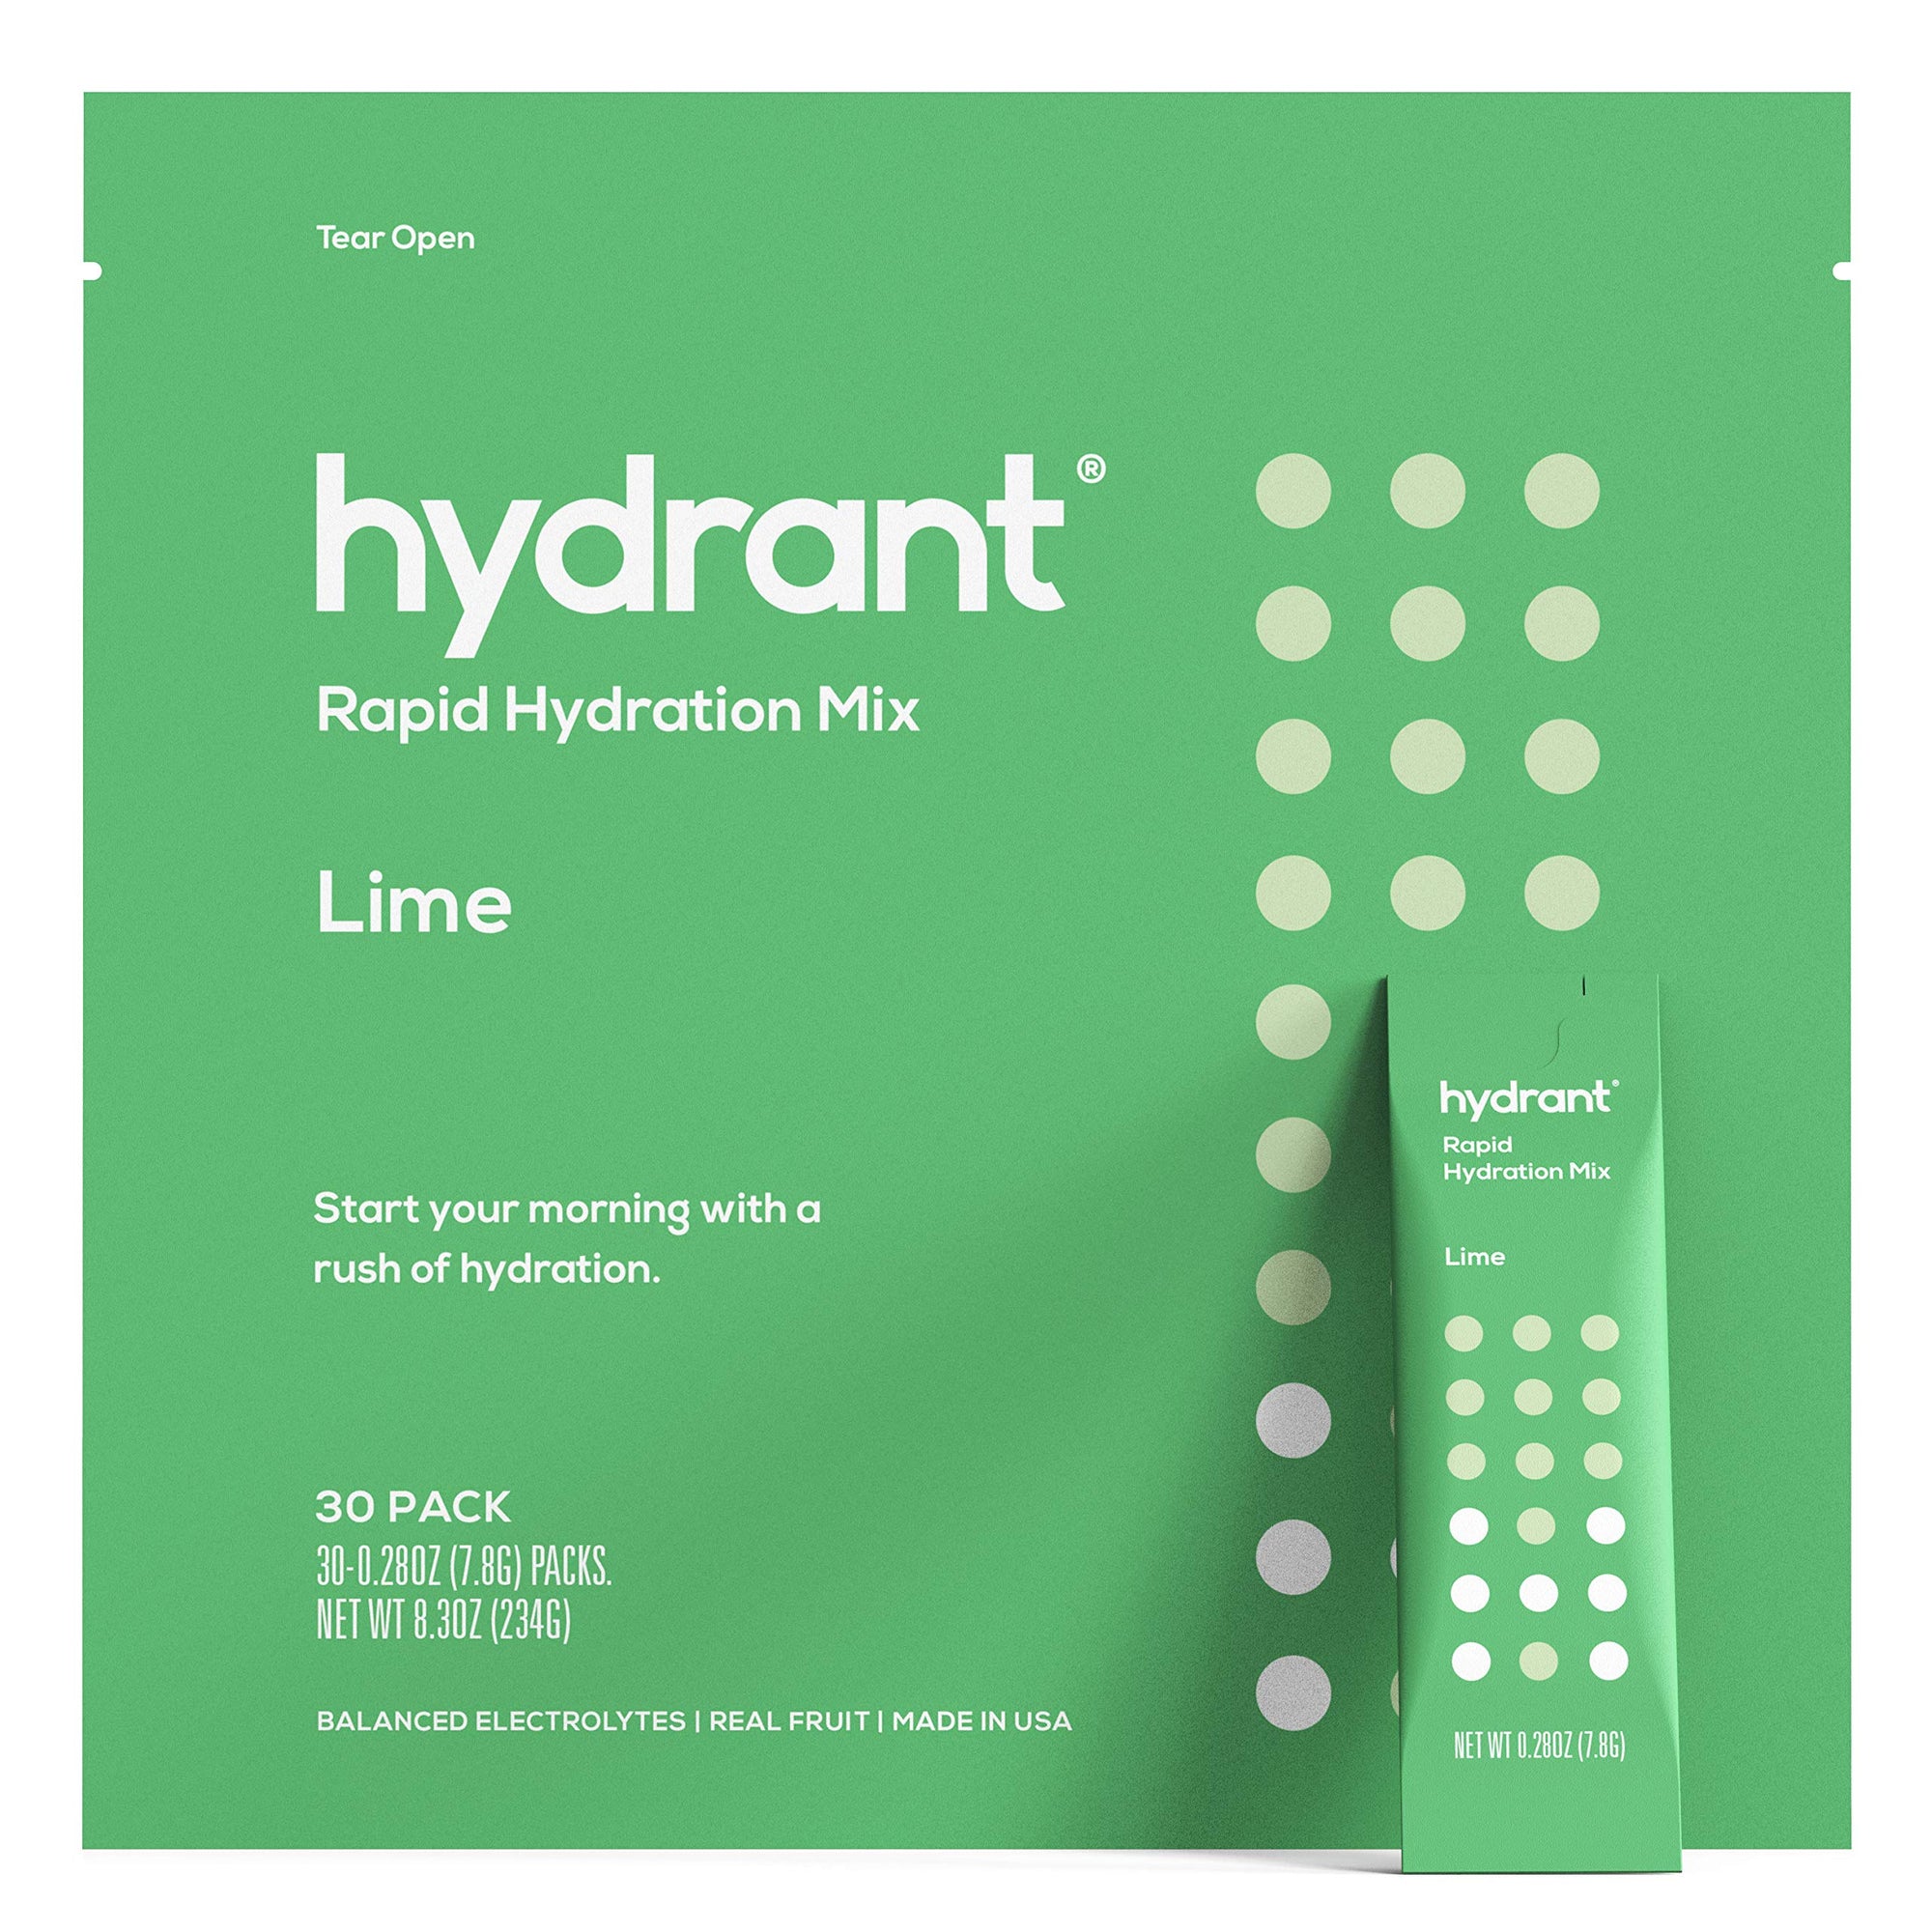 Hydrant Lime Rapid Hydration Mix Version 2 | Electrolyte Powder | Dehydration Recovery Drink - 30pk